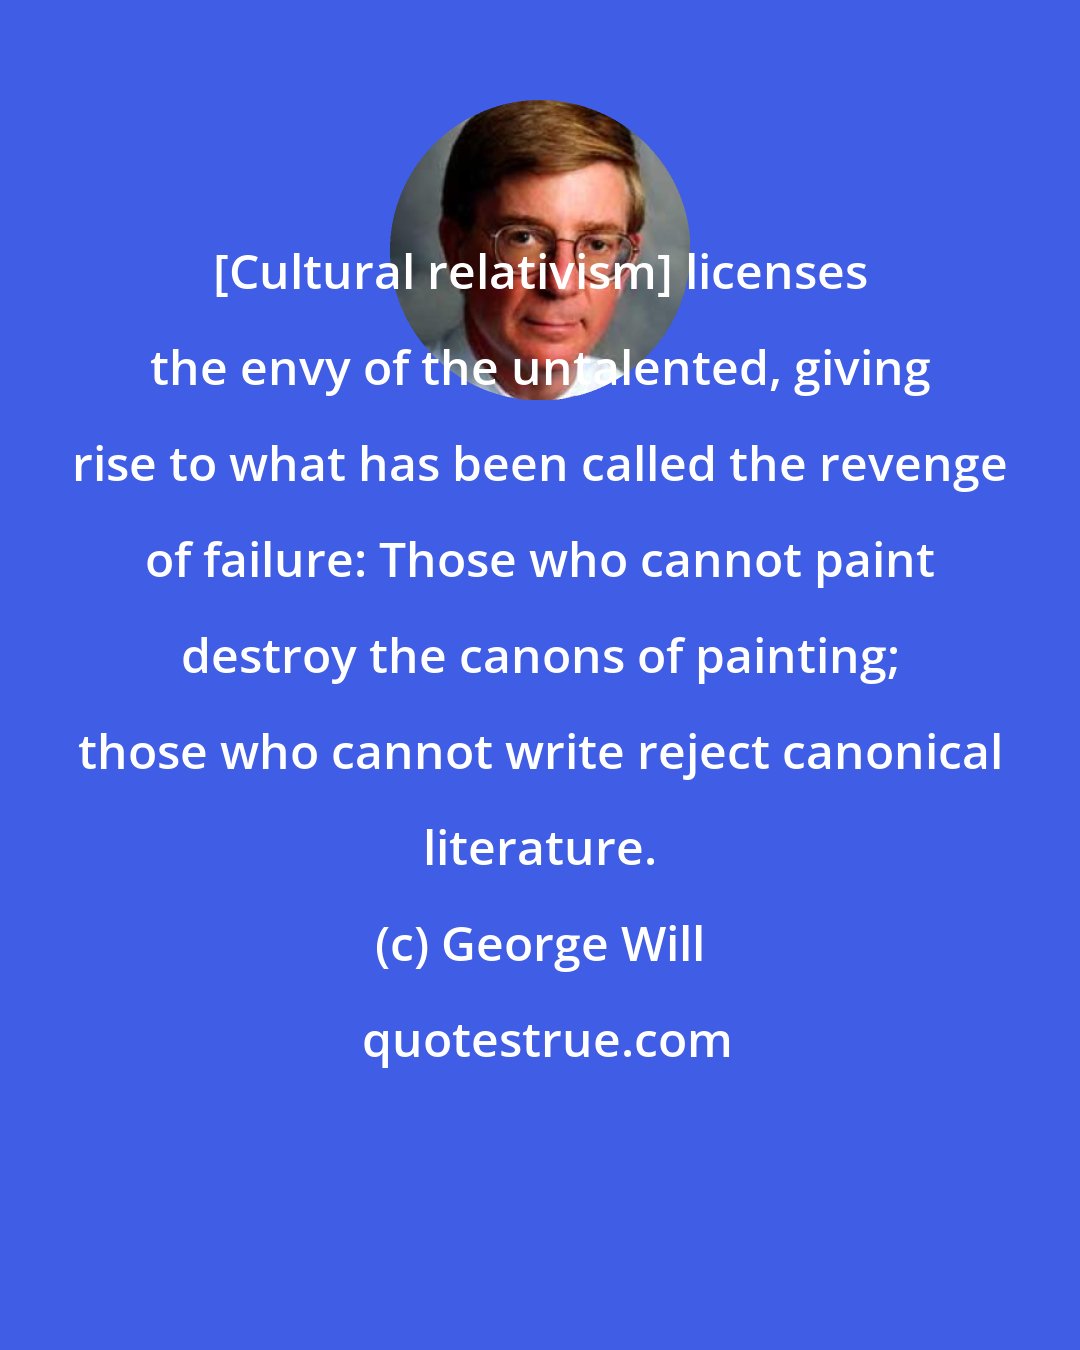 George Will: [Cultural relativism] licenses the envy of the untalented, giving rise to what has been called the revenge of failure: Those who cannot paint destroy the canons of painting; those who cannot write reject canonical literature.